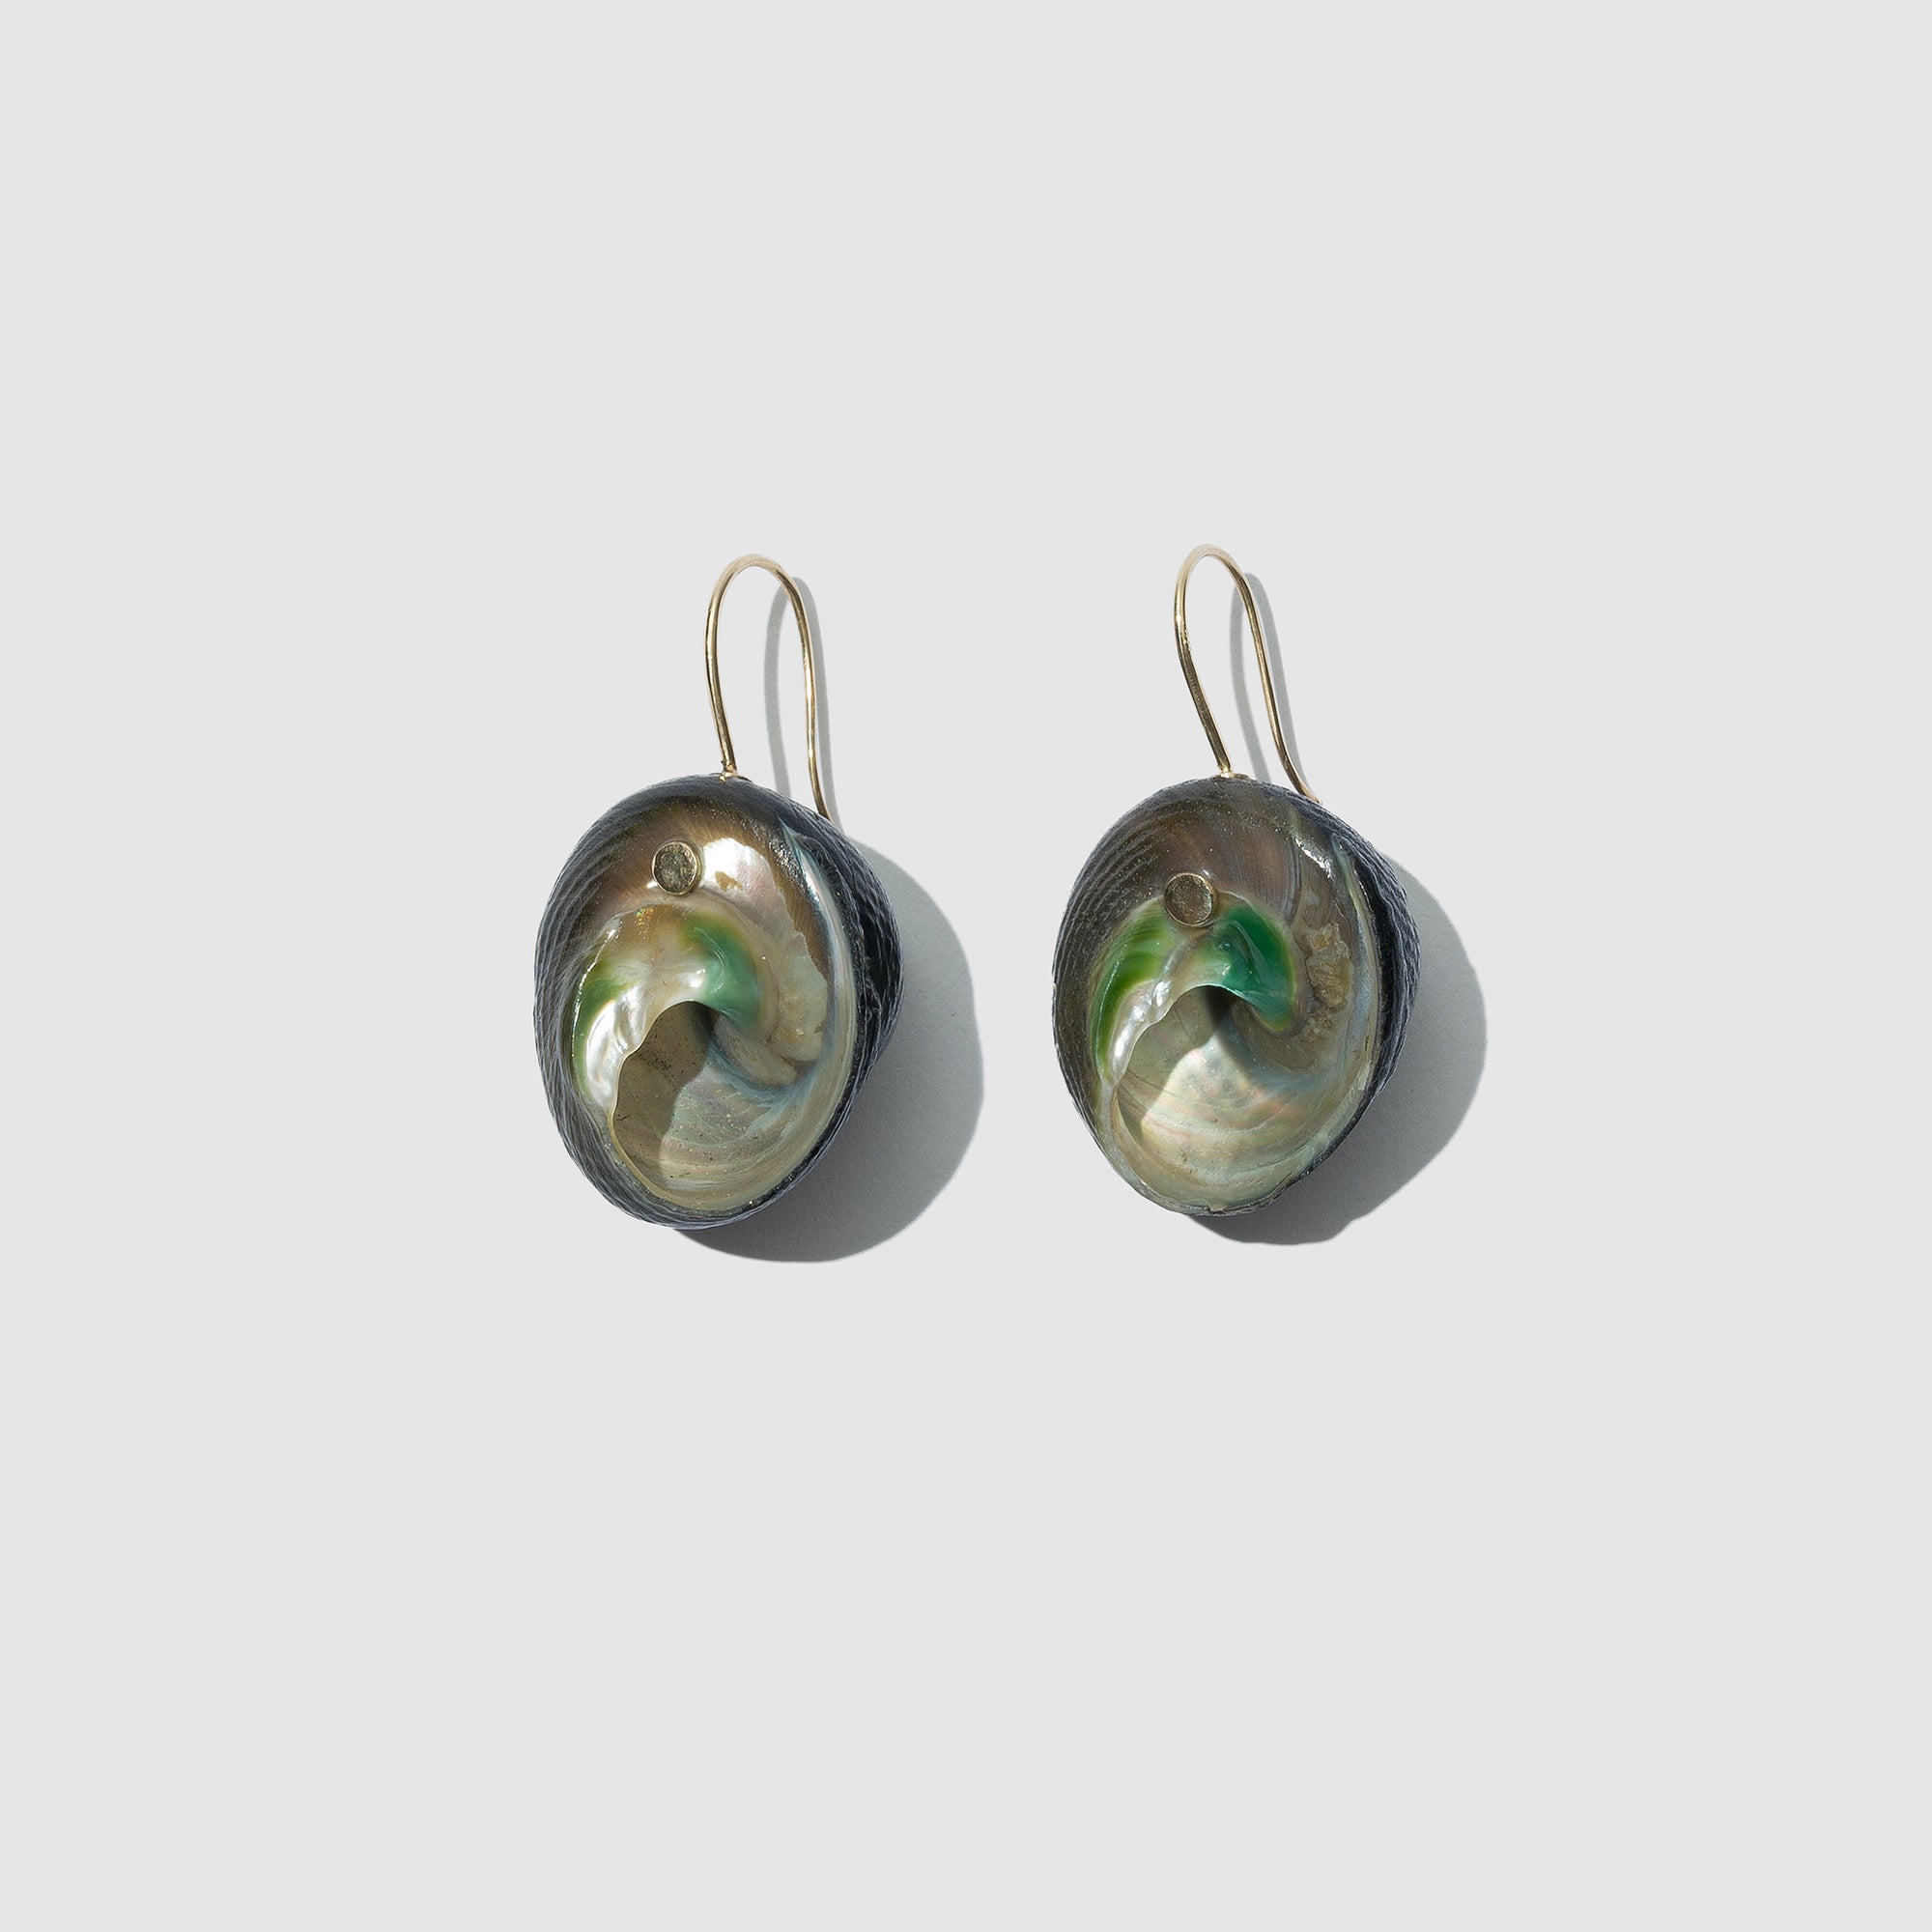 Coco Sterling Earrings - Caracol - Inspired Jewelry and Hats